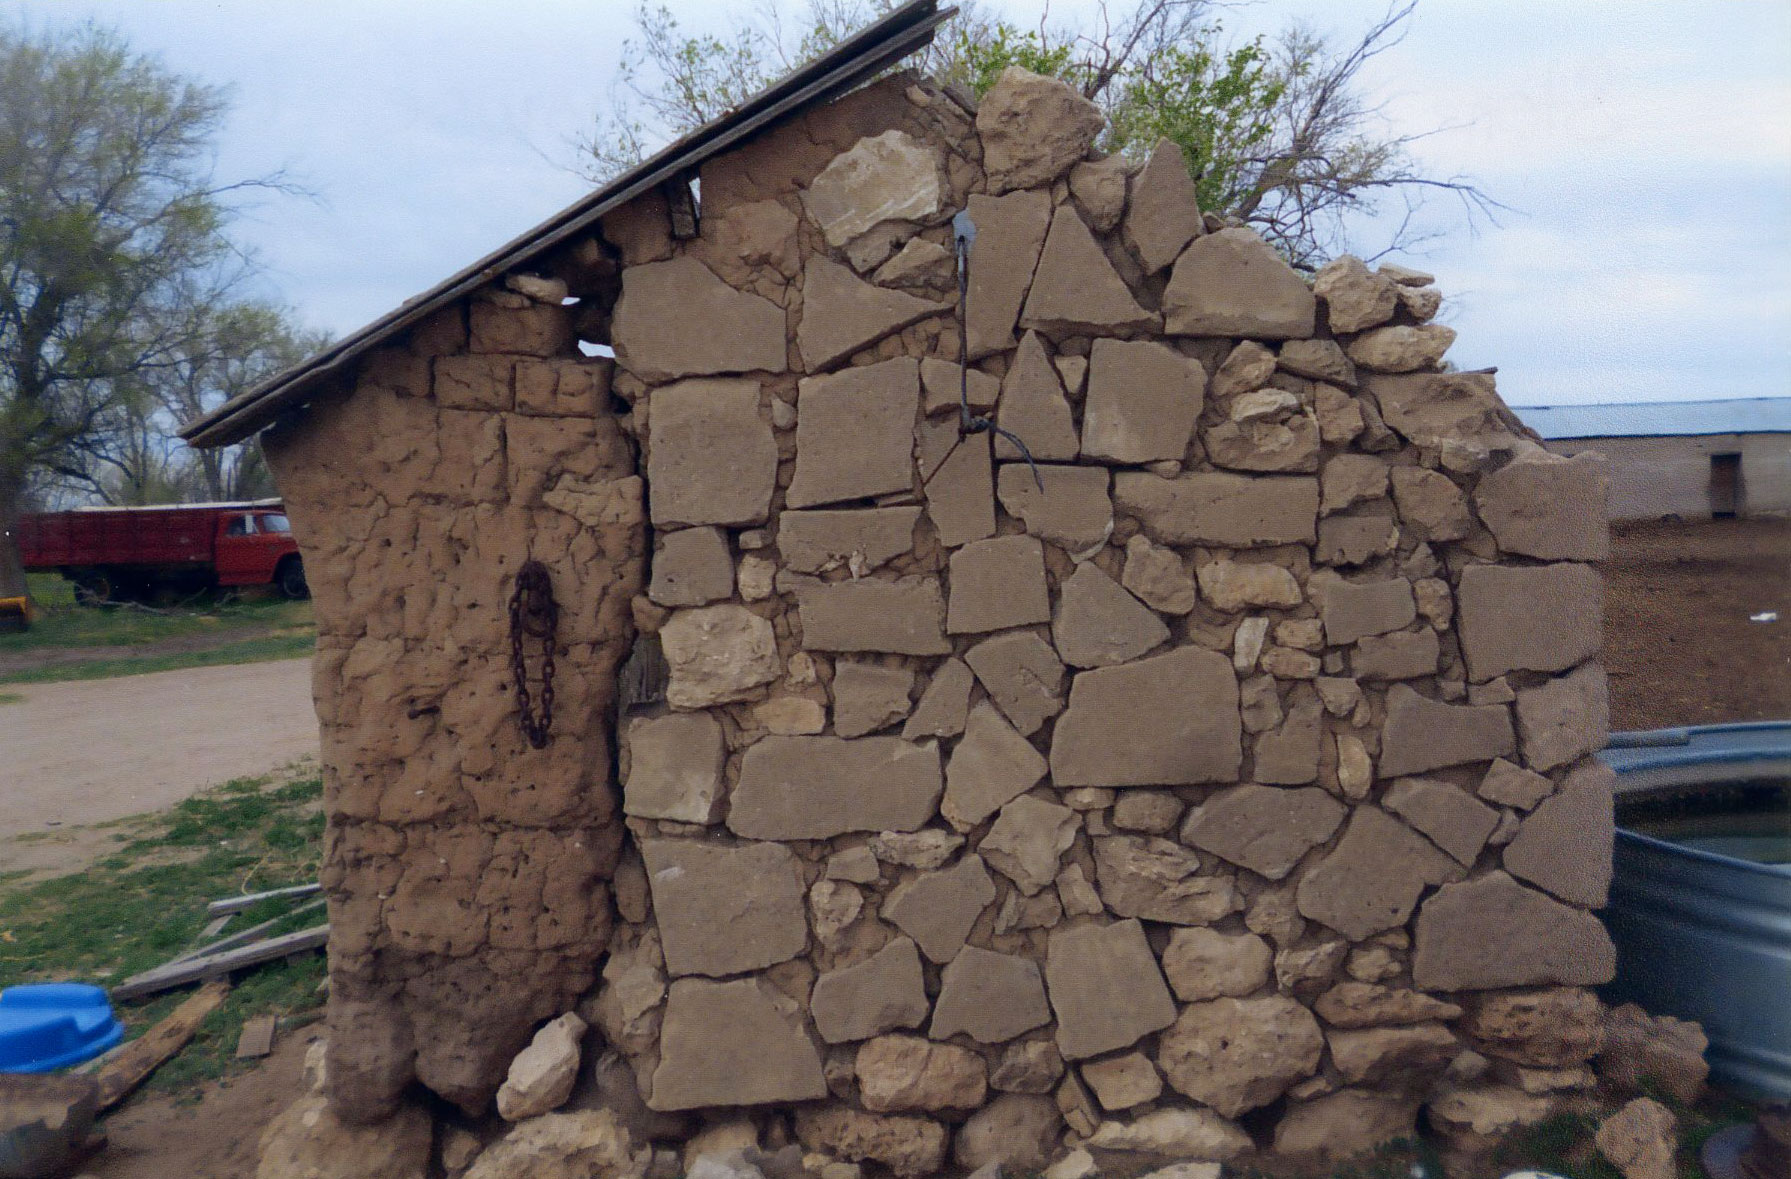 Building made of adobe and stone blocks.